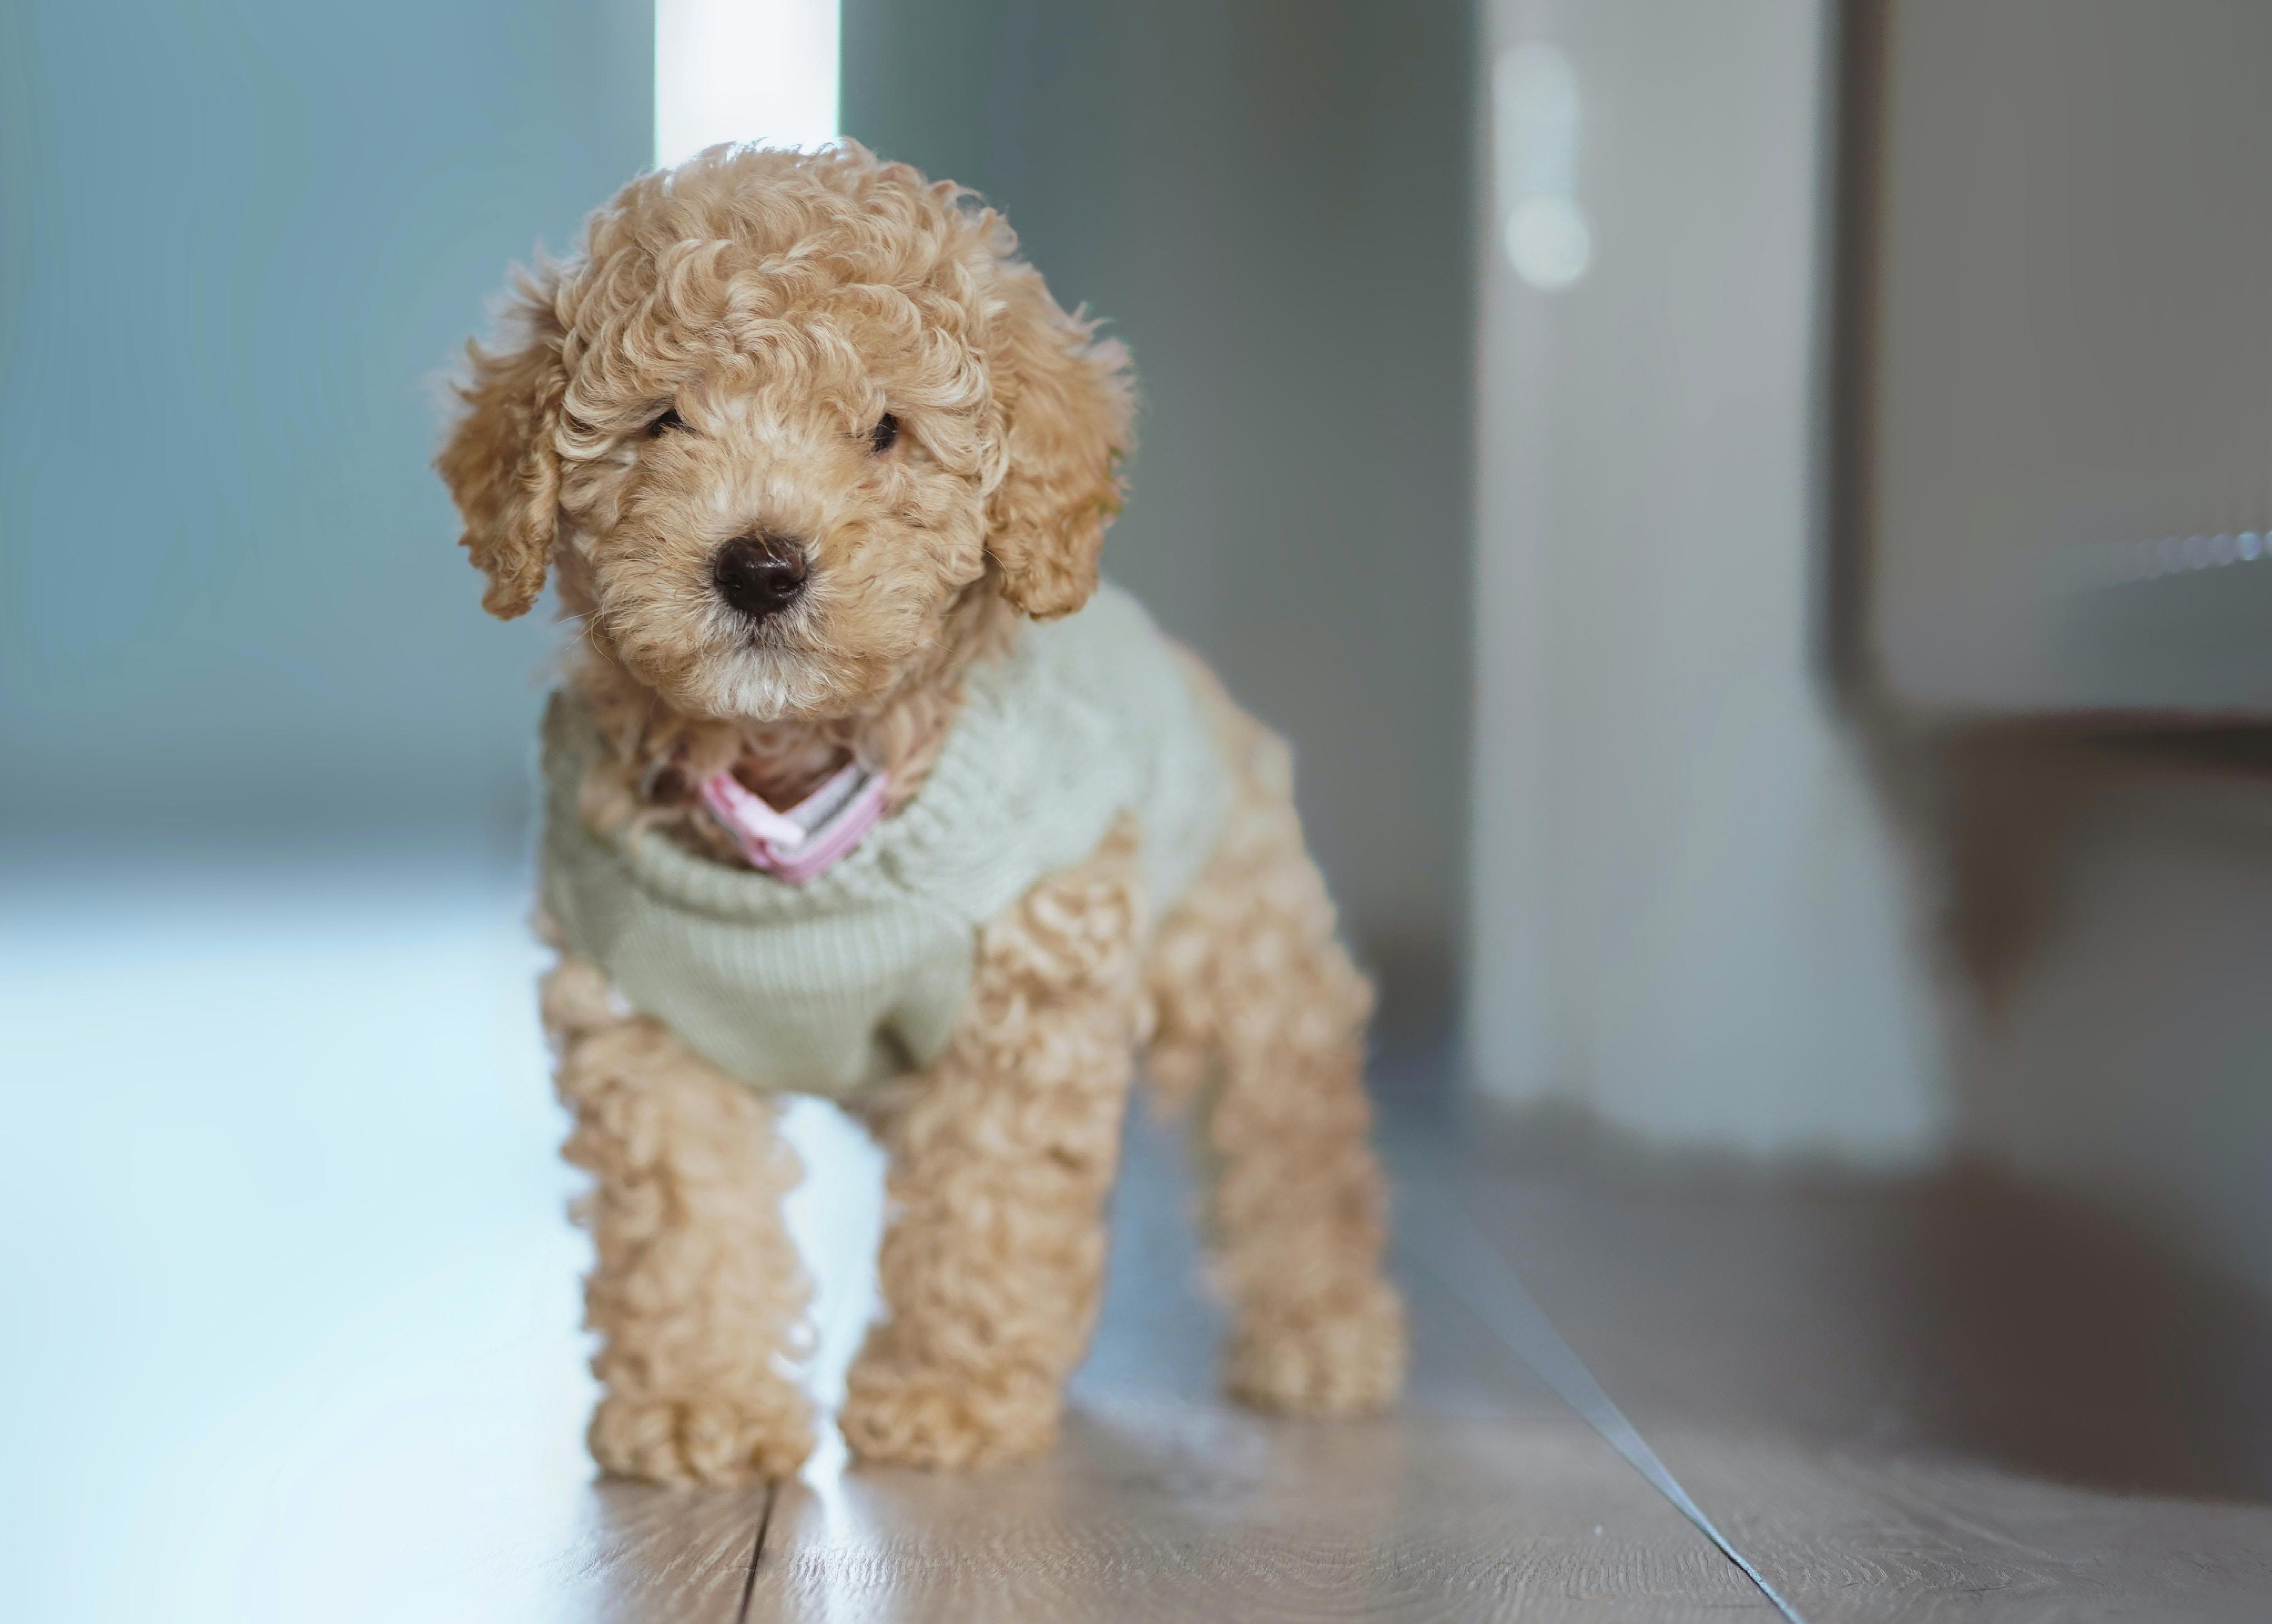 A Balanced Diet for a Healthy Poodle: What's the Best Way to Feed Your Poodle?